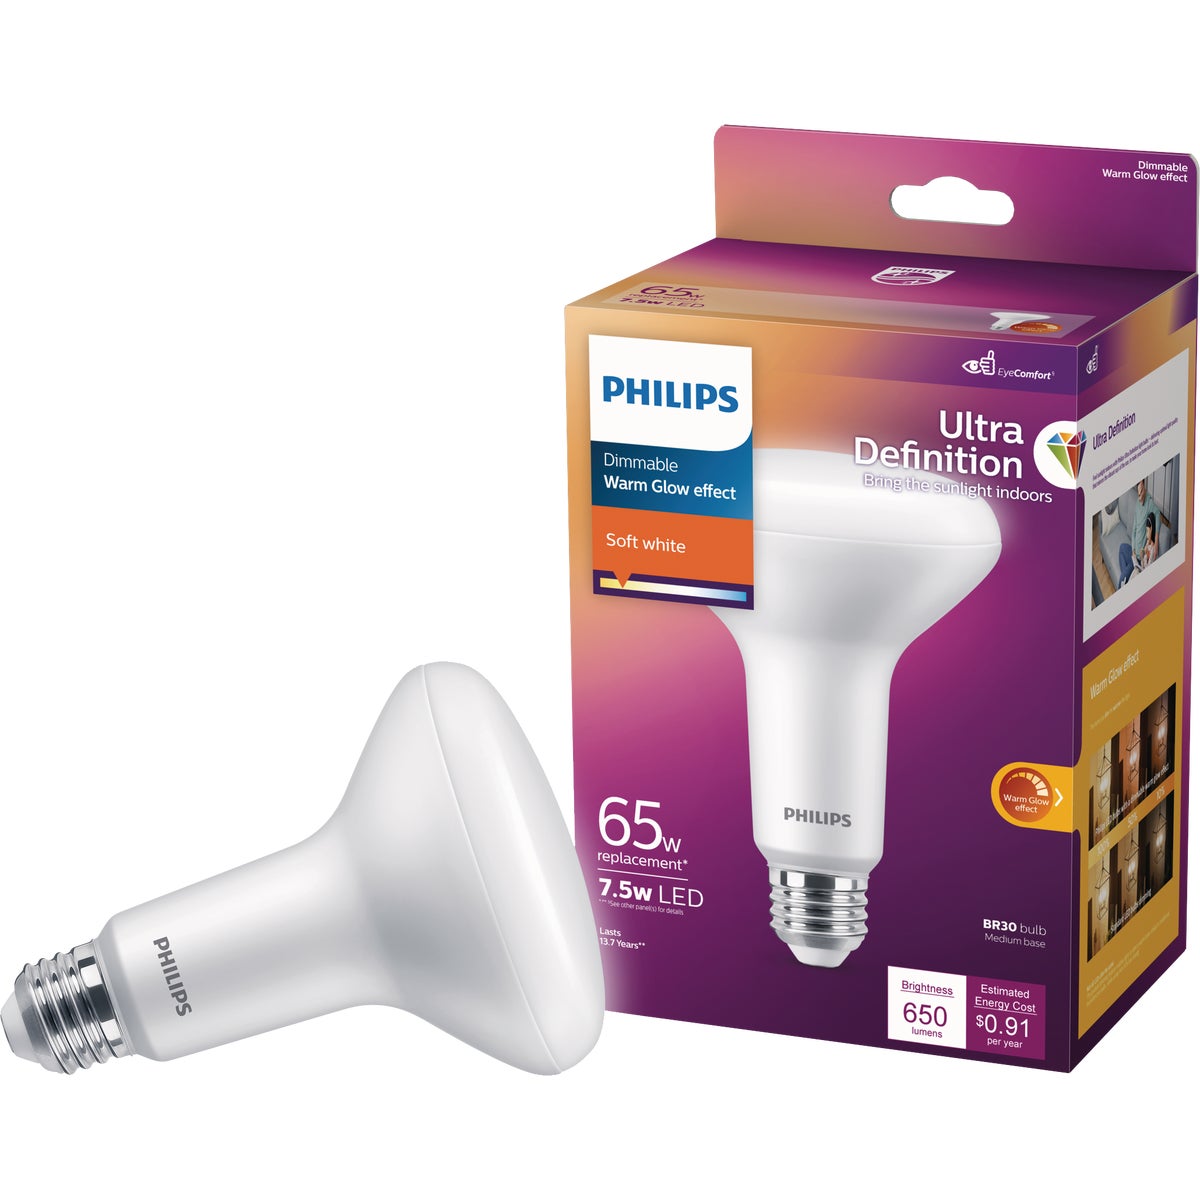 Philips Warm Glow Ultra Definition 65W Equivalent Soft White BR30 Medium Dimmable LED Floodlight Light Bulb